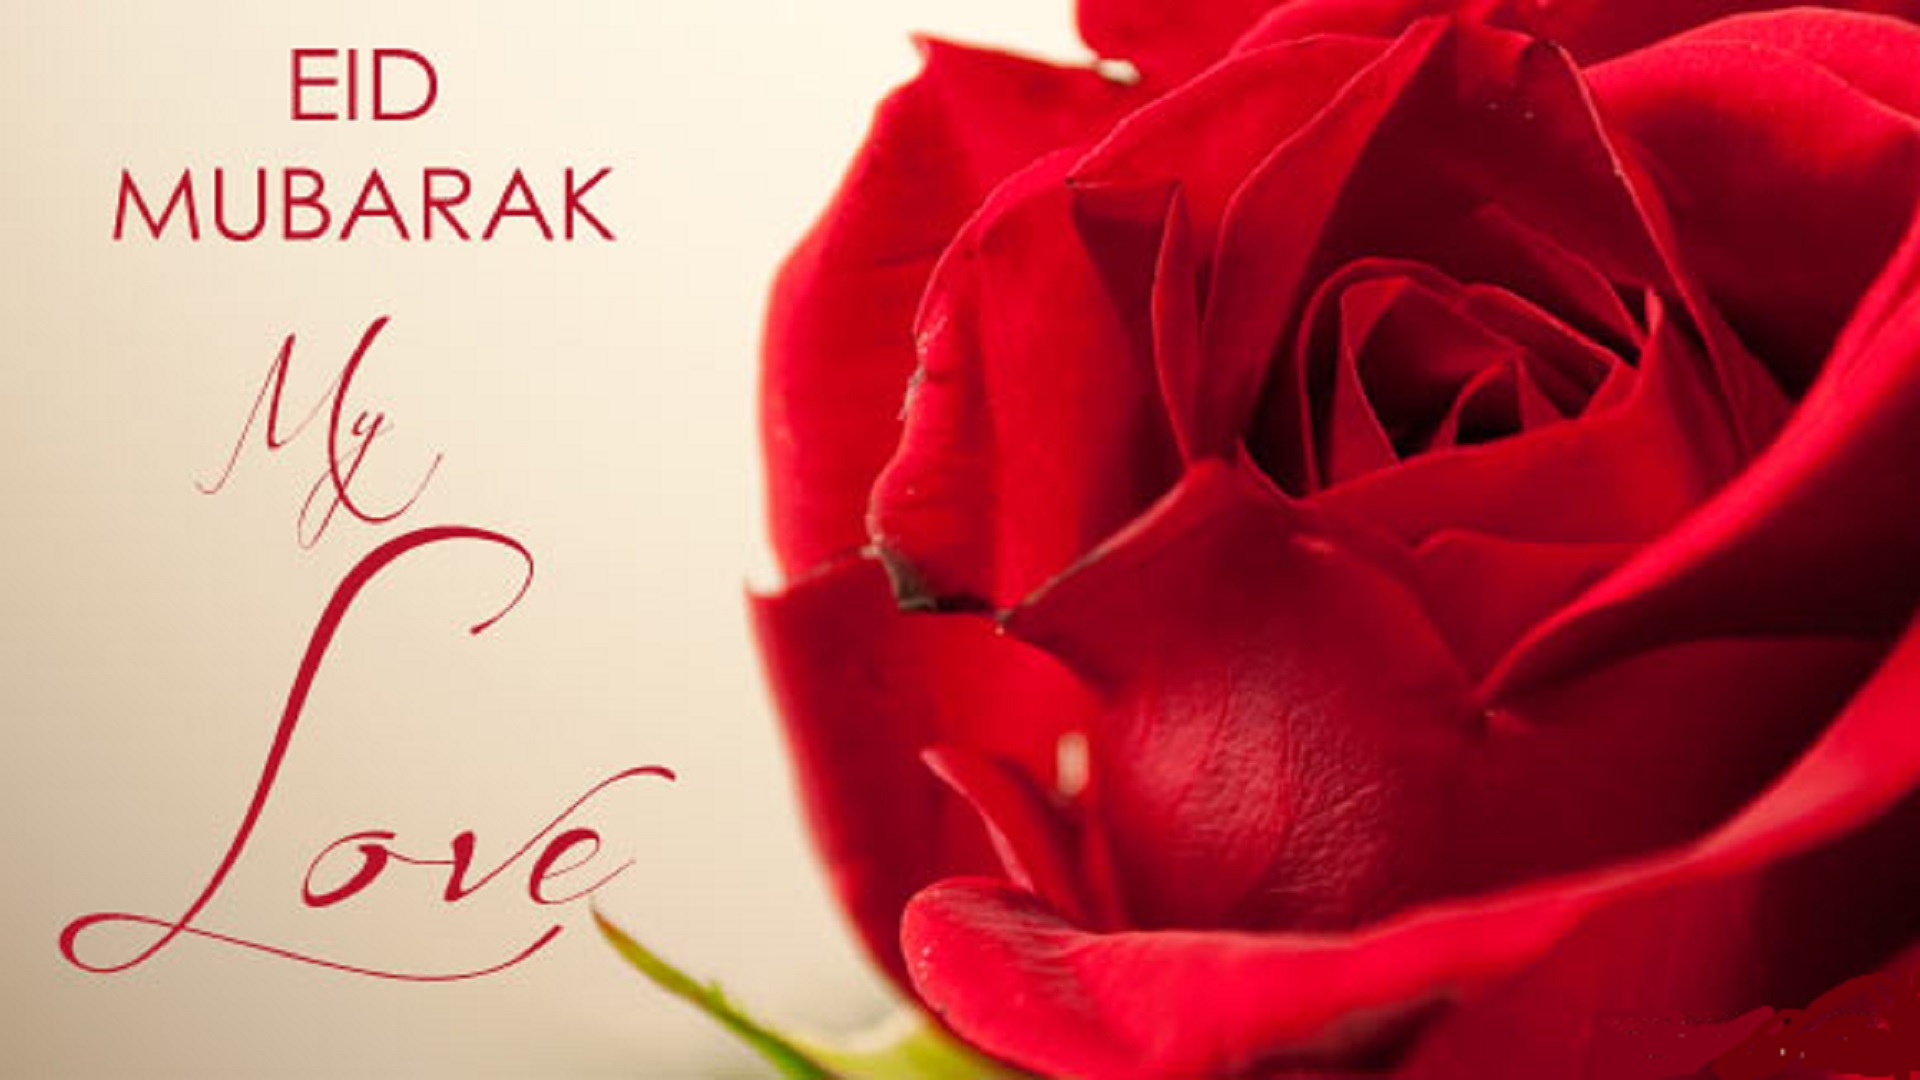 Lovely Eid Mubarak Wishes Mobile Free Hd Download Images